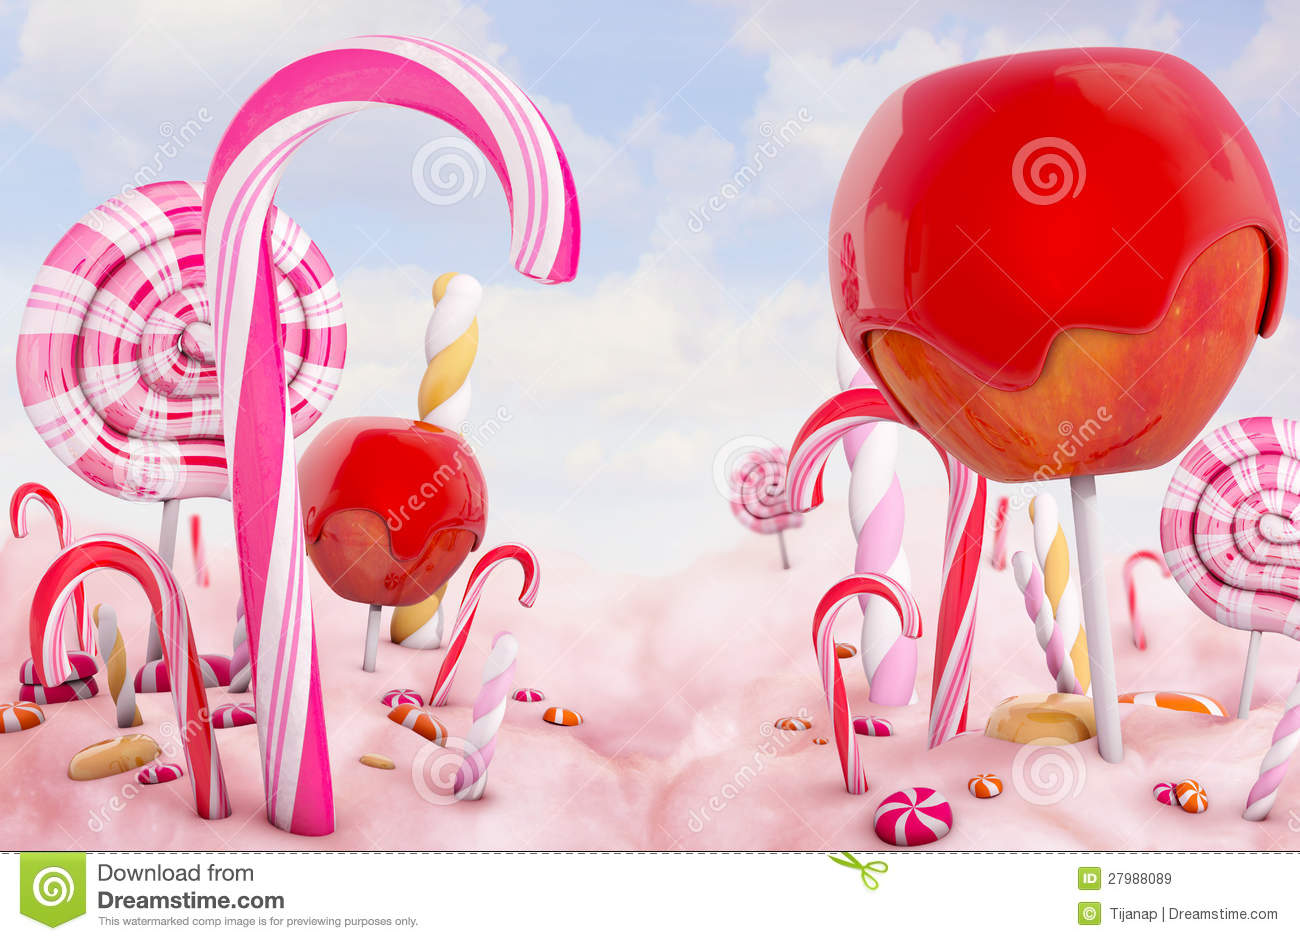 Candy Land Royalty Free Stock Images   Image  27988089